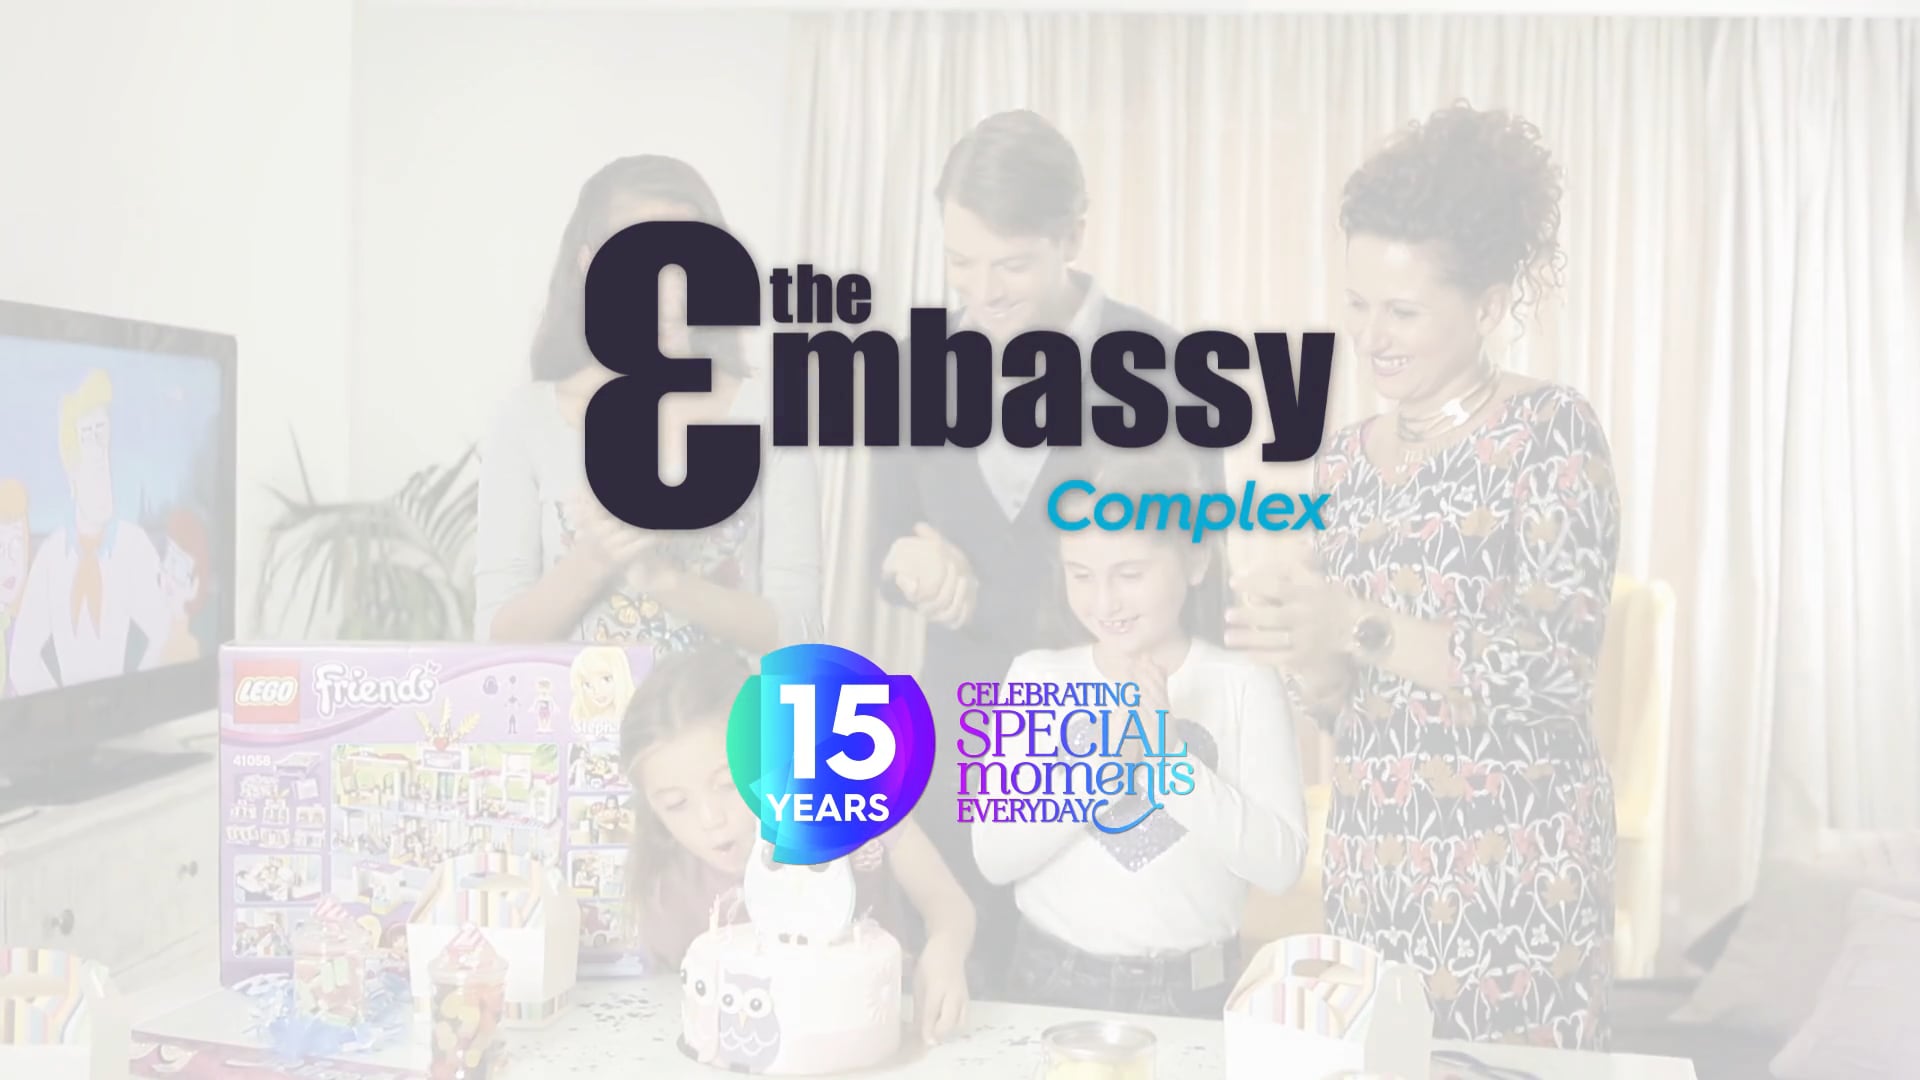 The Embassy shopping complex and cinemas - 15th year anniversary